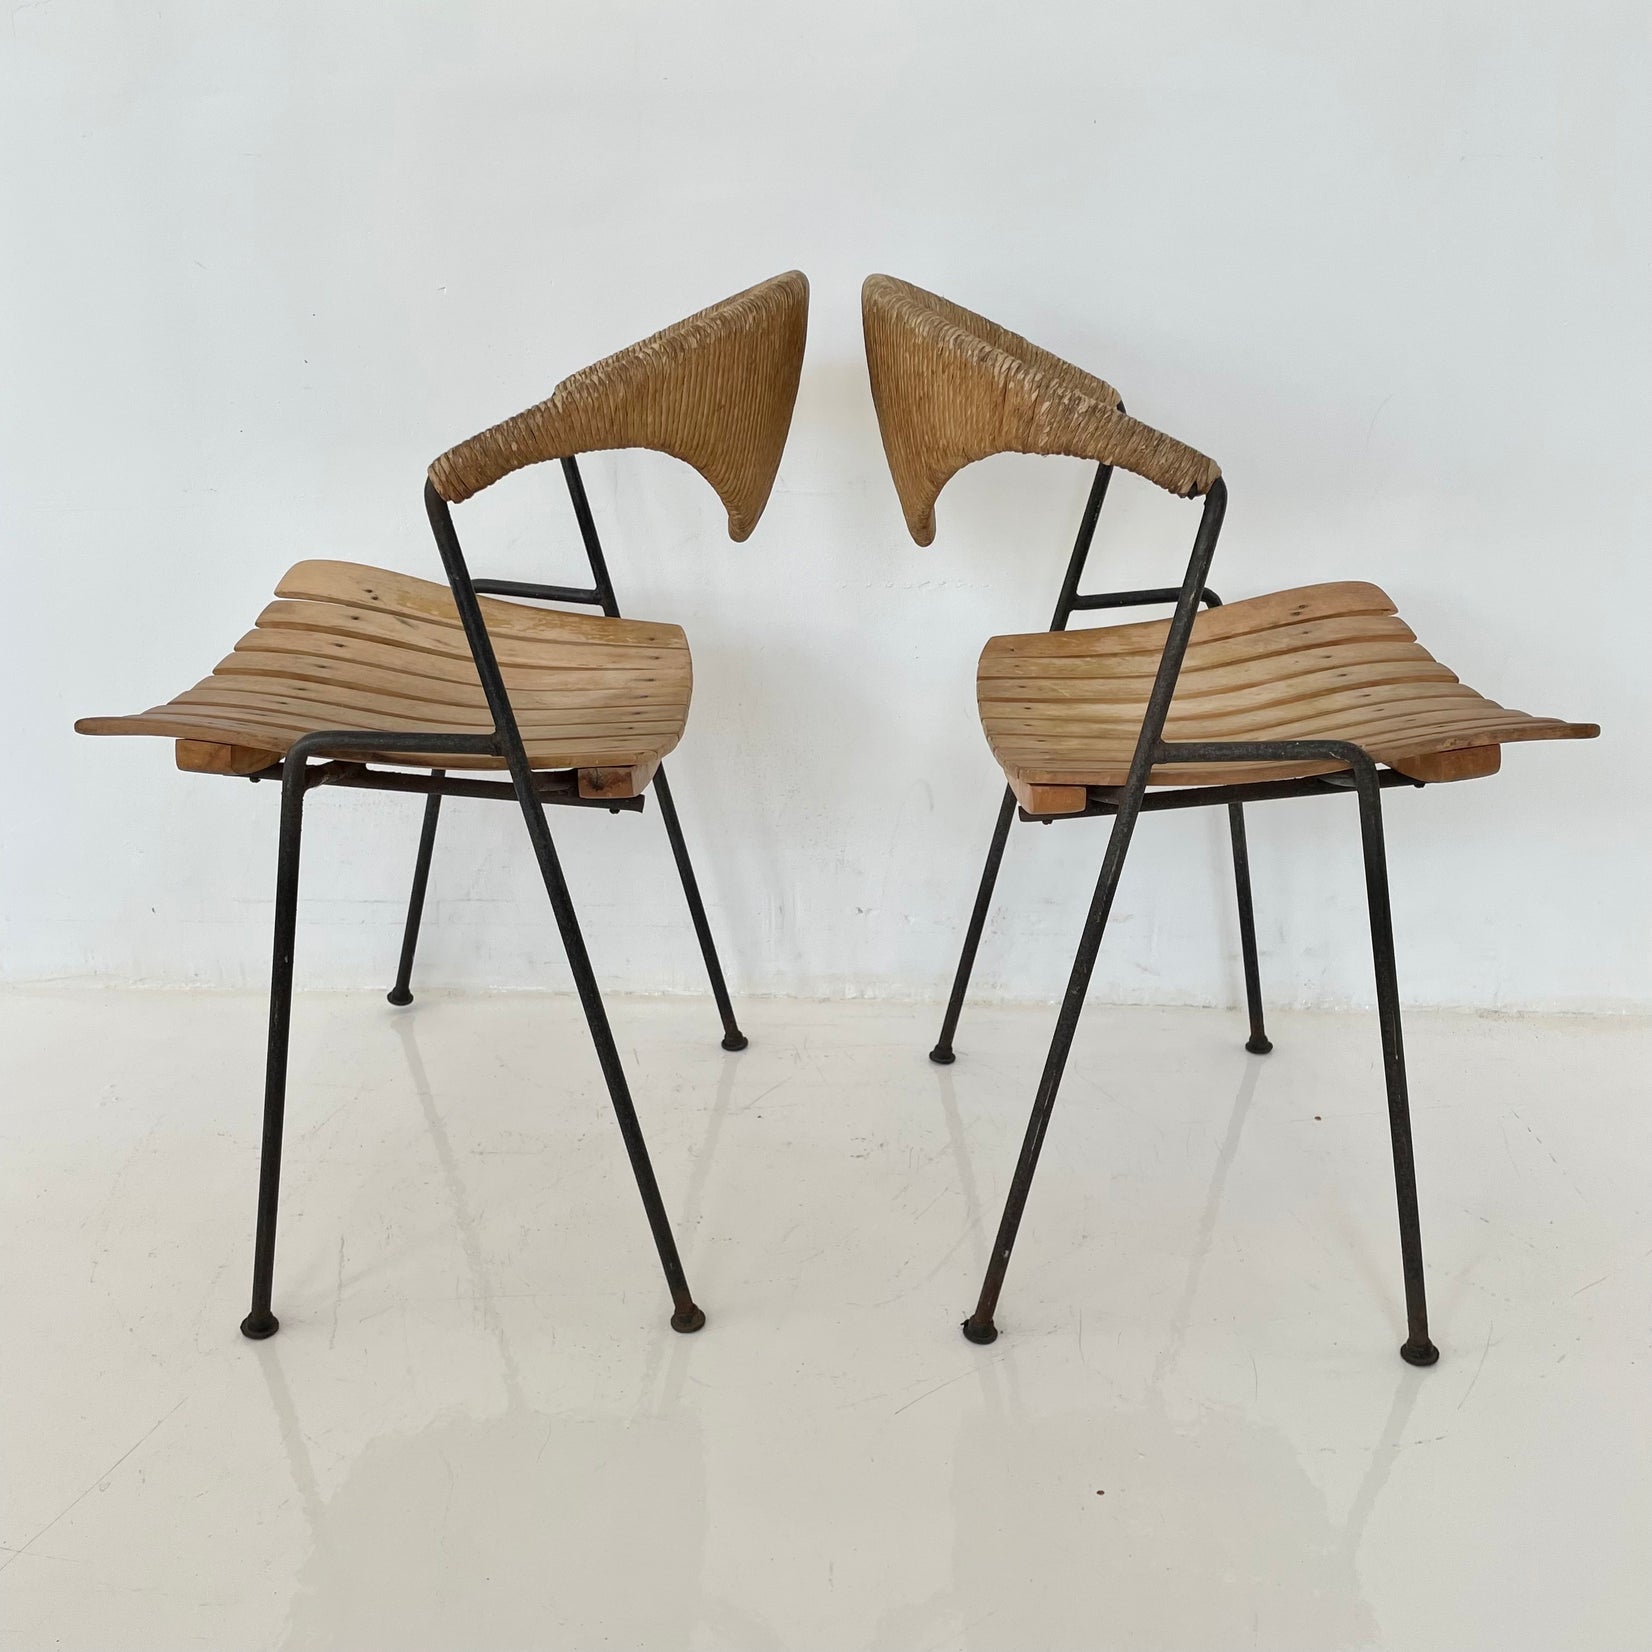 Arthur Umanoff Wood and Rush Sculptural Chairs, 1950s United States